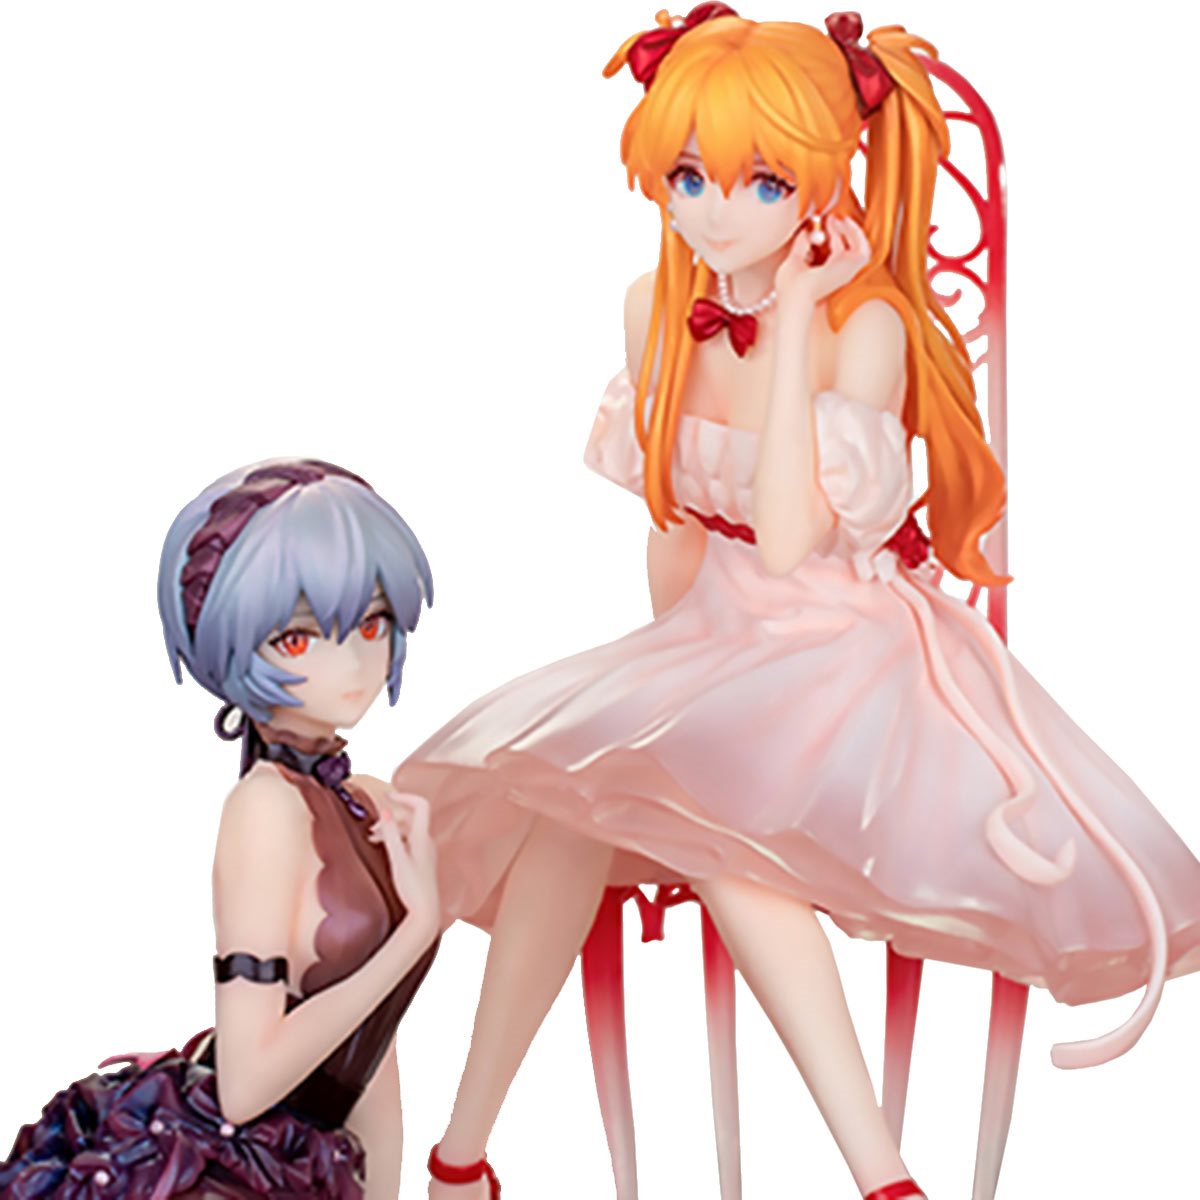 Neon Genesis: Evangelion - Rei Ayanami and Asuka Shikinami 1/7th scale Figure Myethos (Langley Whisper of Flower Ver.)